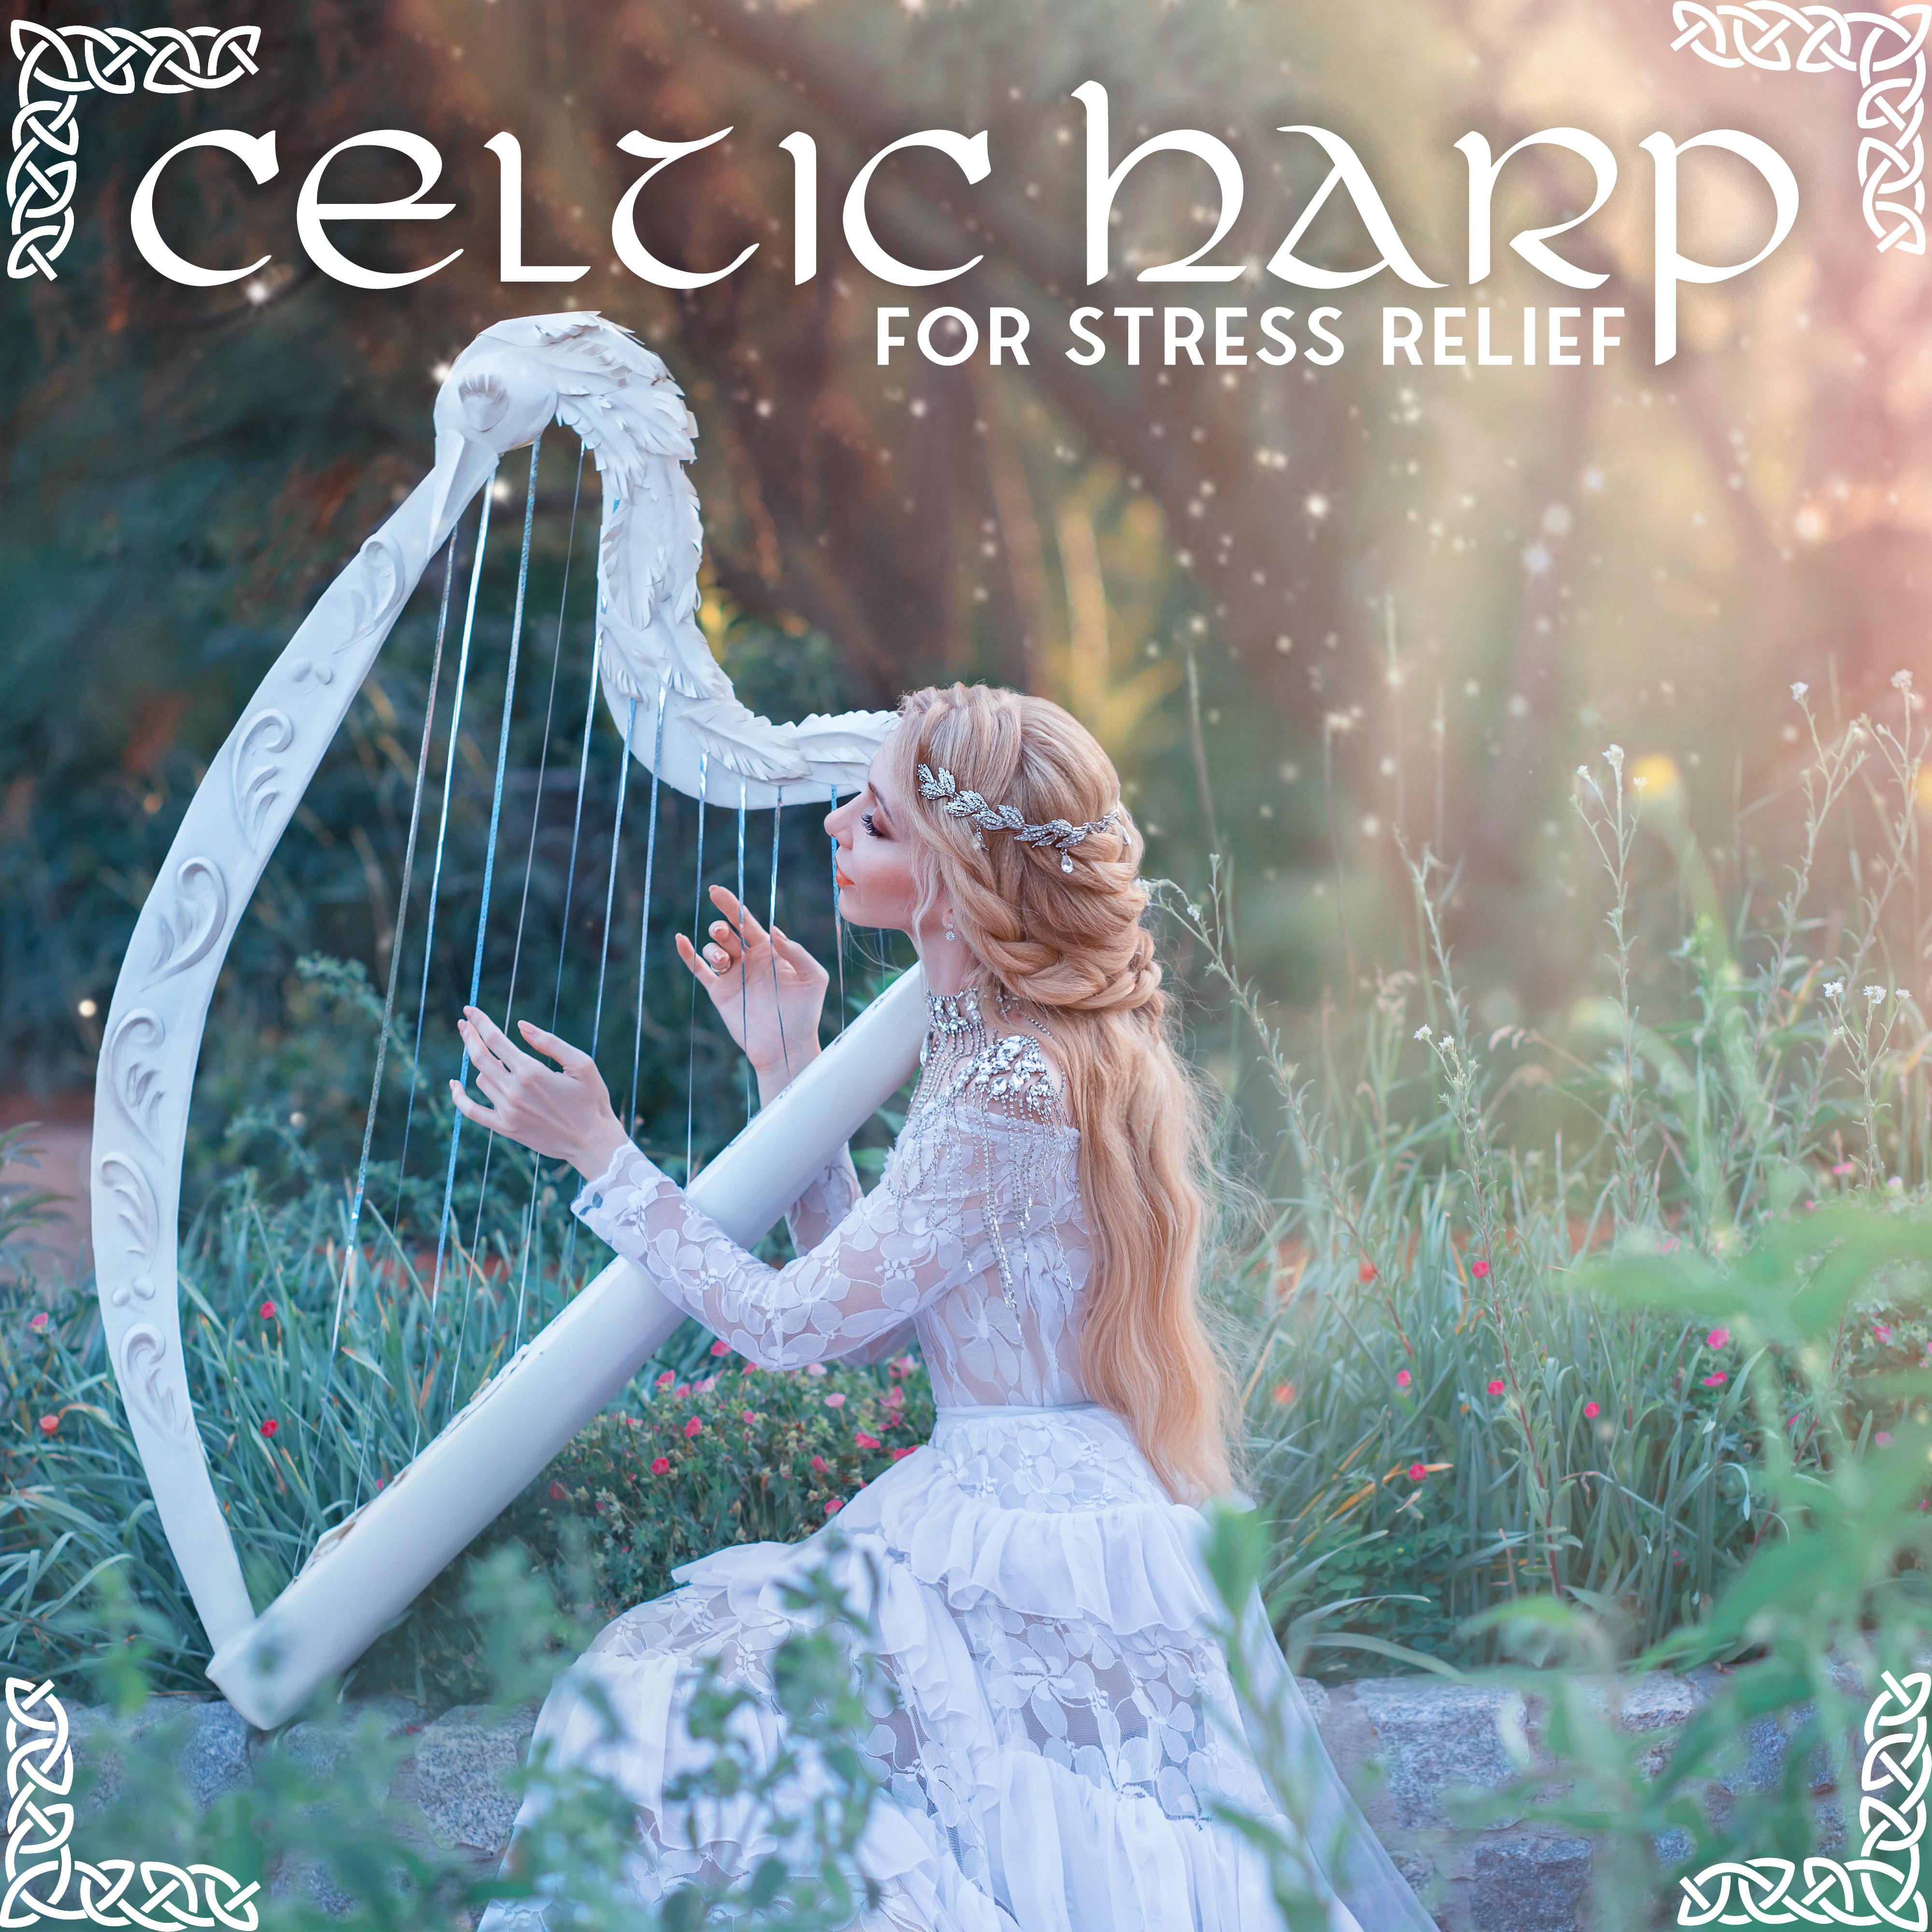 Nature For Relaxation Celtic Chillout Relaxation Academyrelieve Stress Music Academy 单曲 网易云音乐 